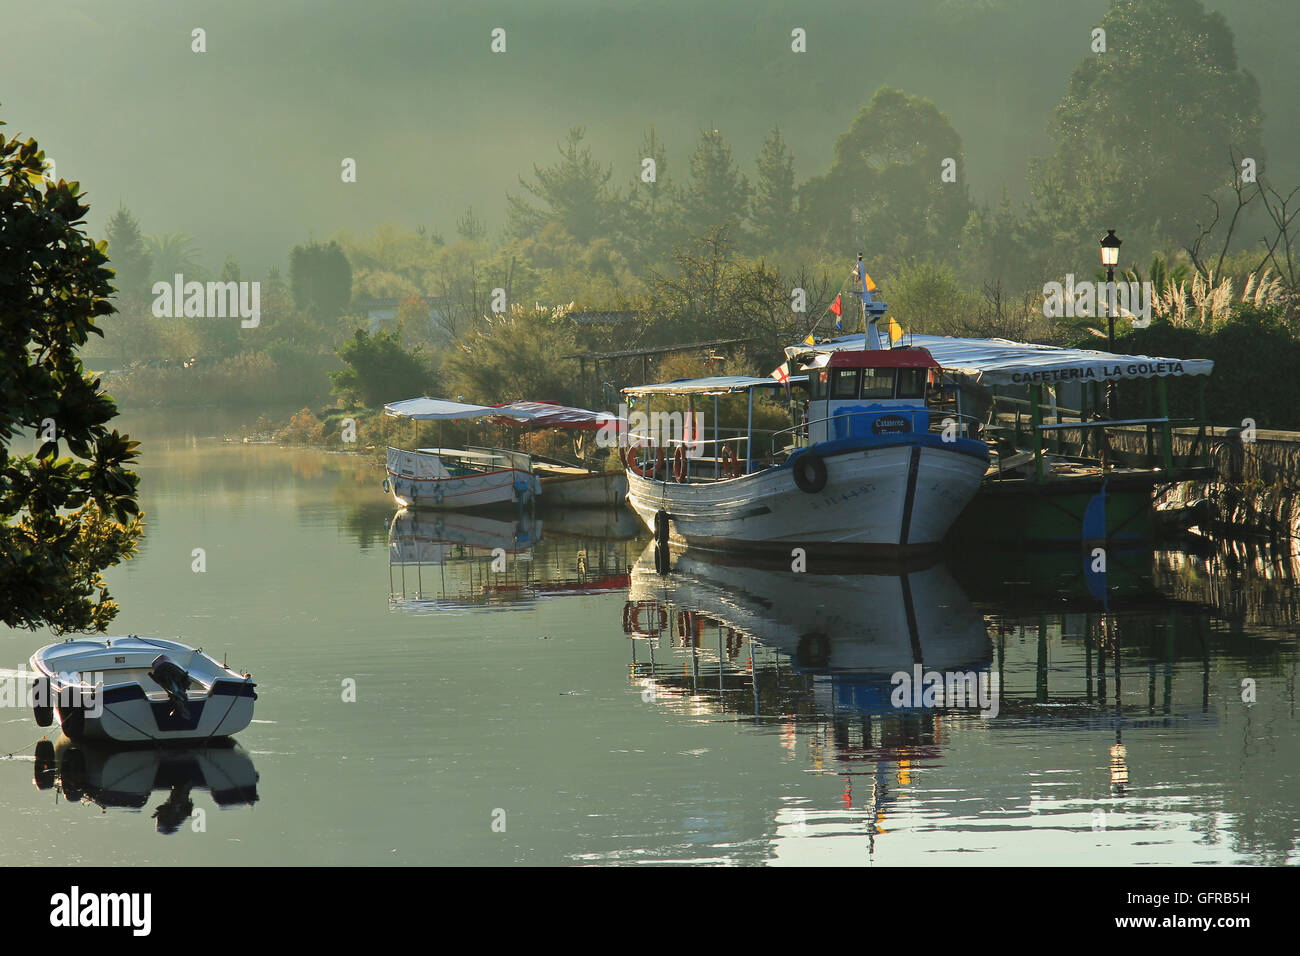 Early morning river view with boats and sunny hazy landscape Stock Photo